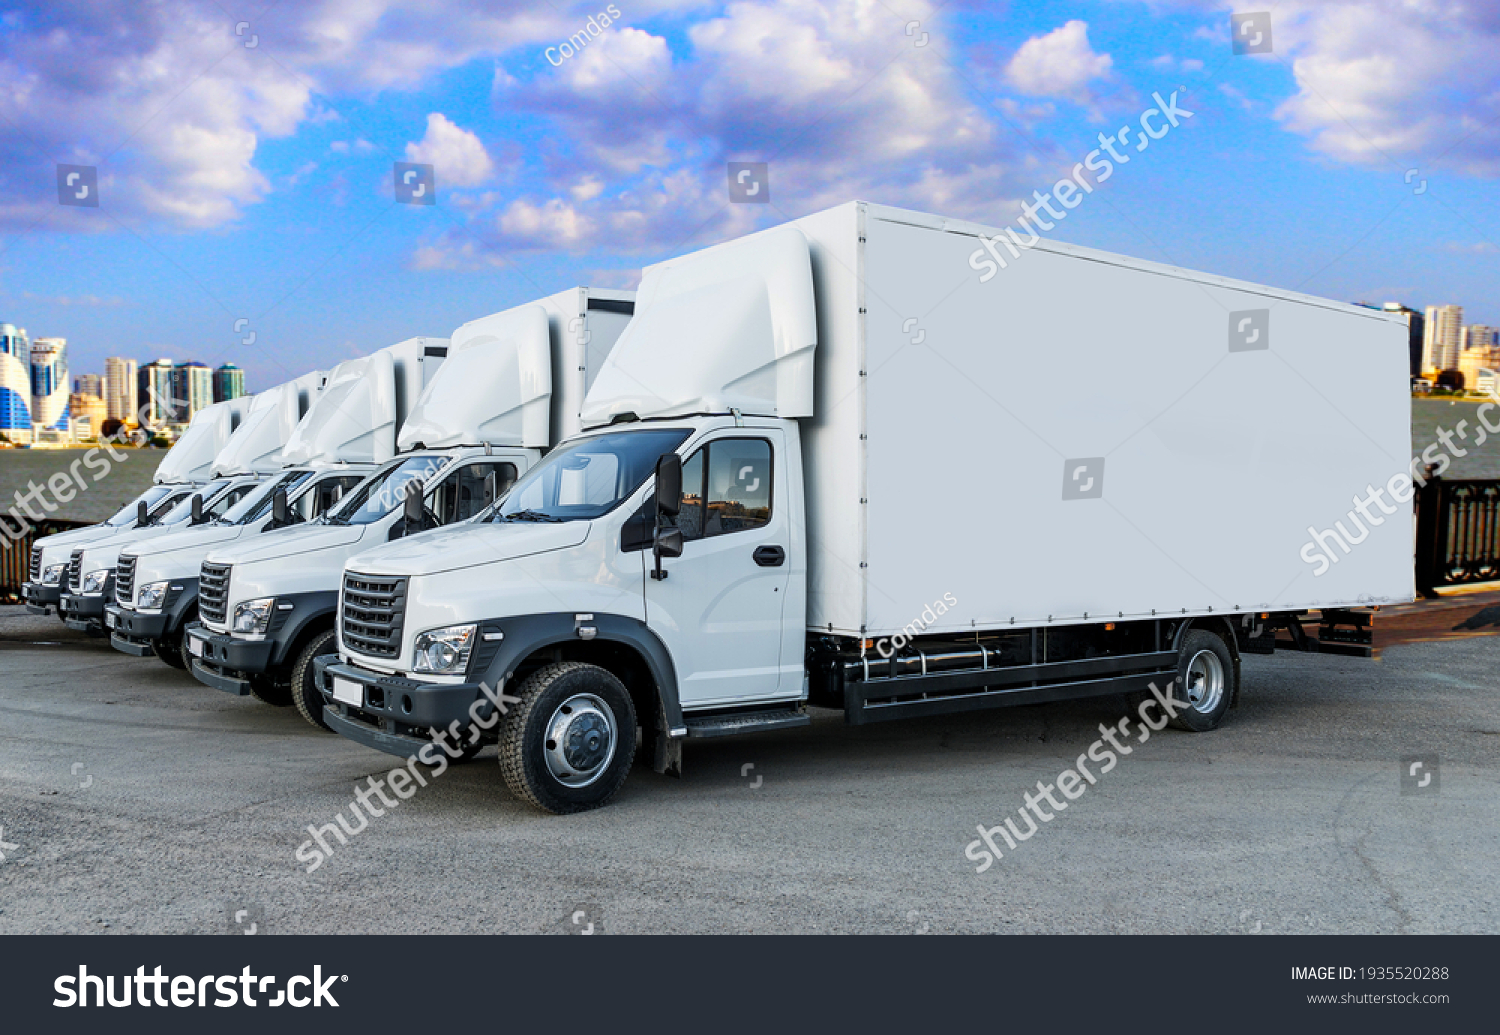 Some trucks are parked in a parking lot next to a logistics warehouse by the river. Several trucks are lined up in the parking lot. Logistic transport #1935520288